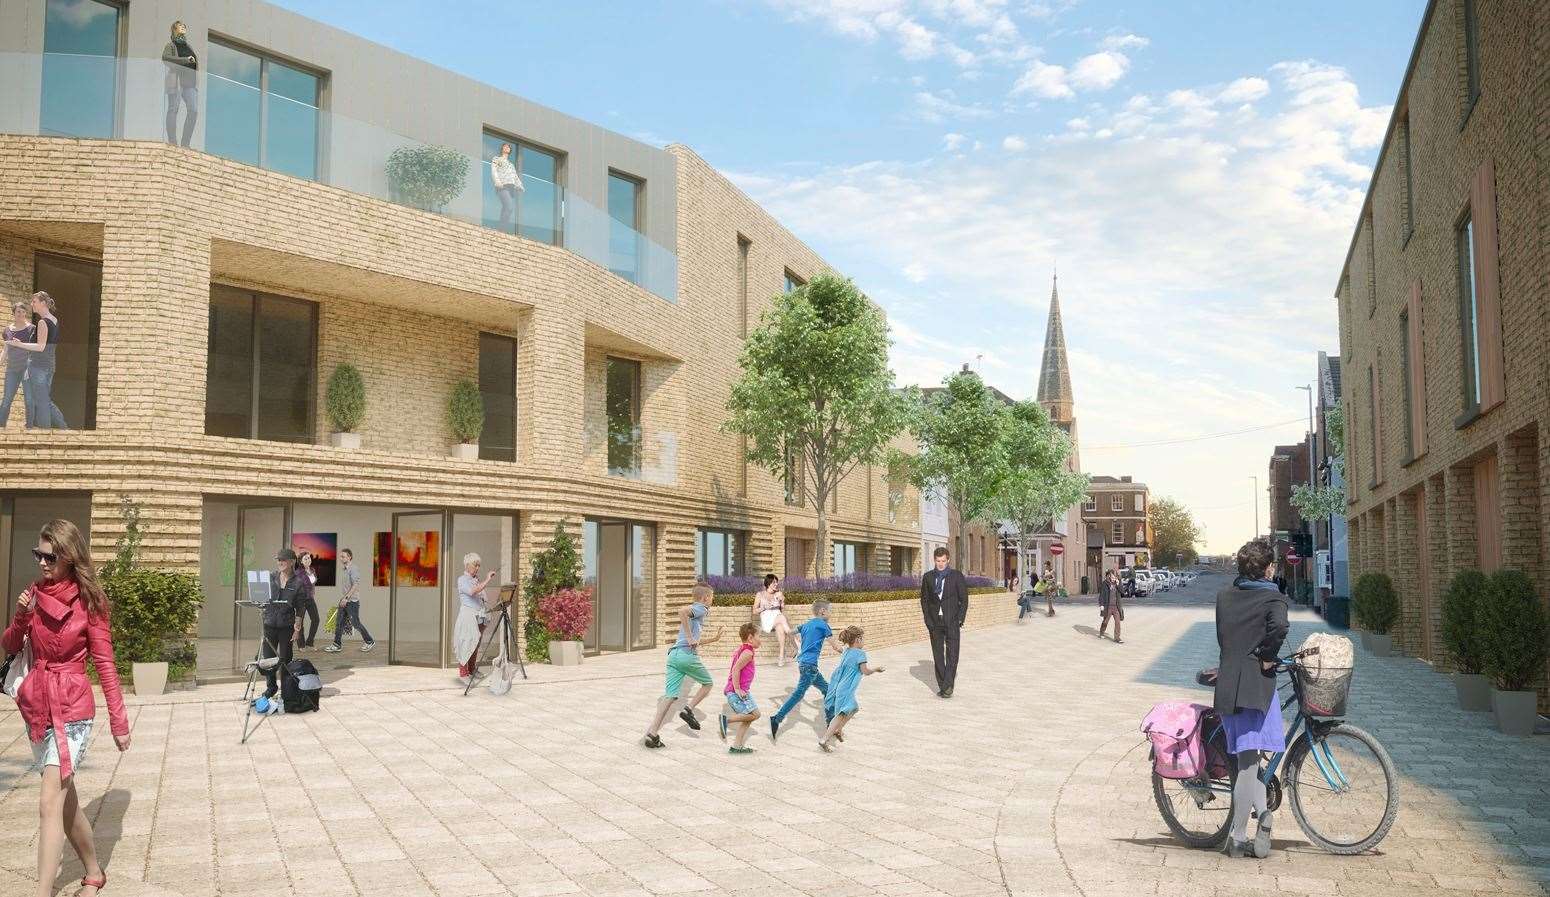 A CGI showing the proposal for the Beach Street development in Herne Bay that was approved in 2019